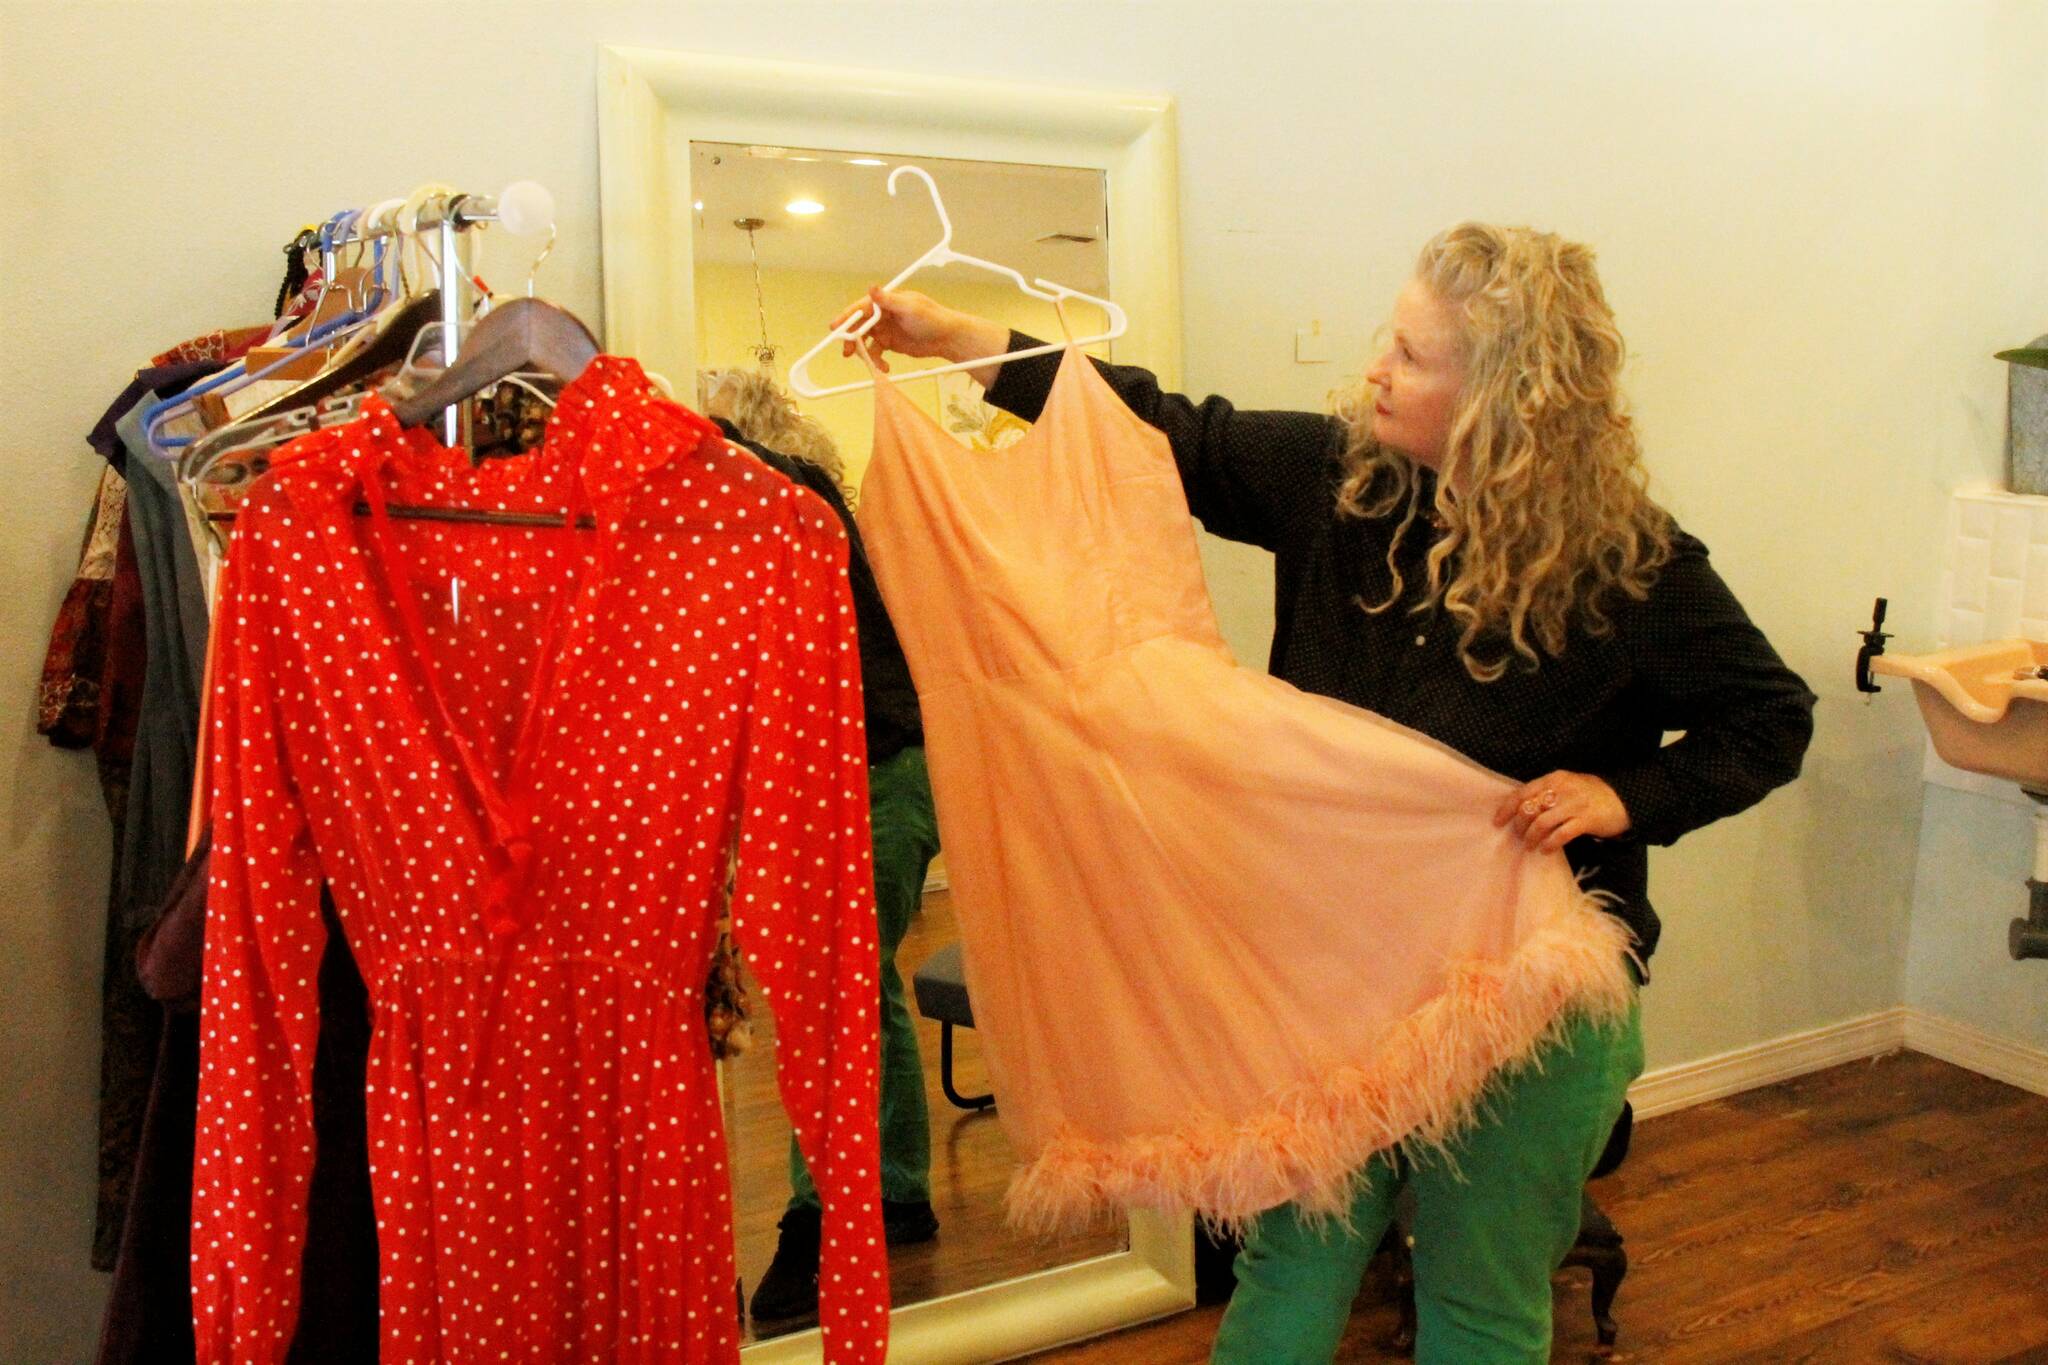 Alison Donham holds up a dress from her rack of vintage prom dresses. Clients may be asked to model an outfit. (Photo by Kira Erickson/South Whidbey Record)